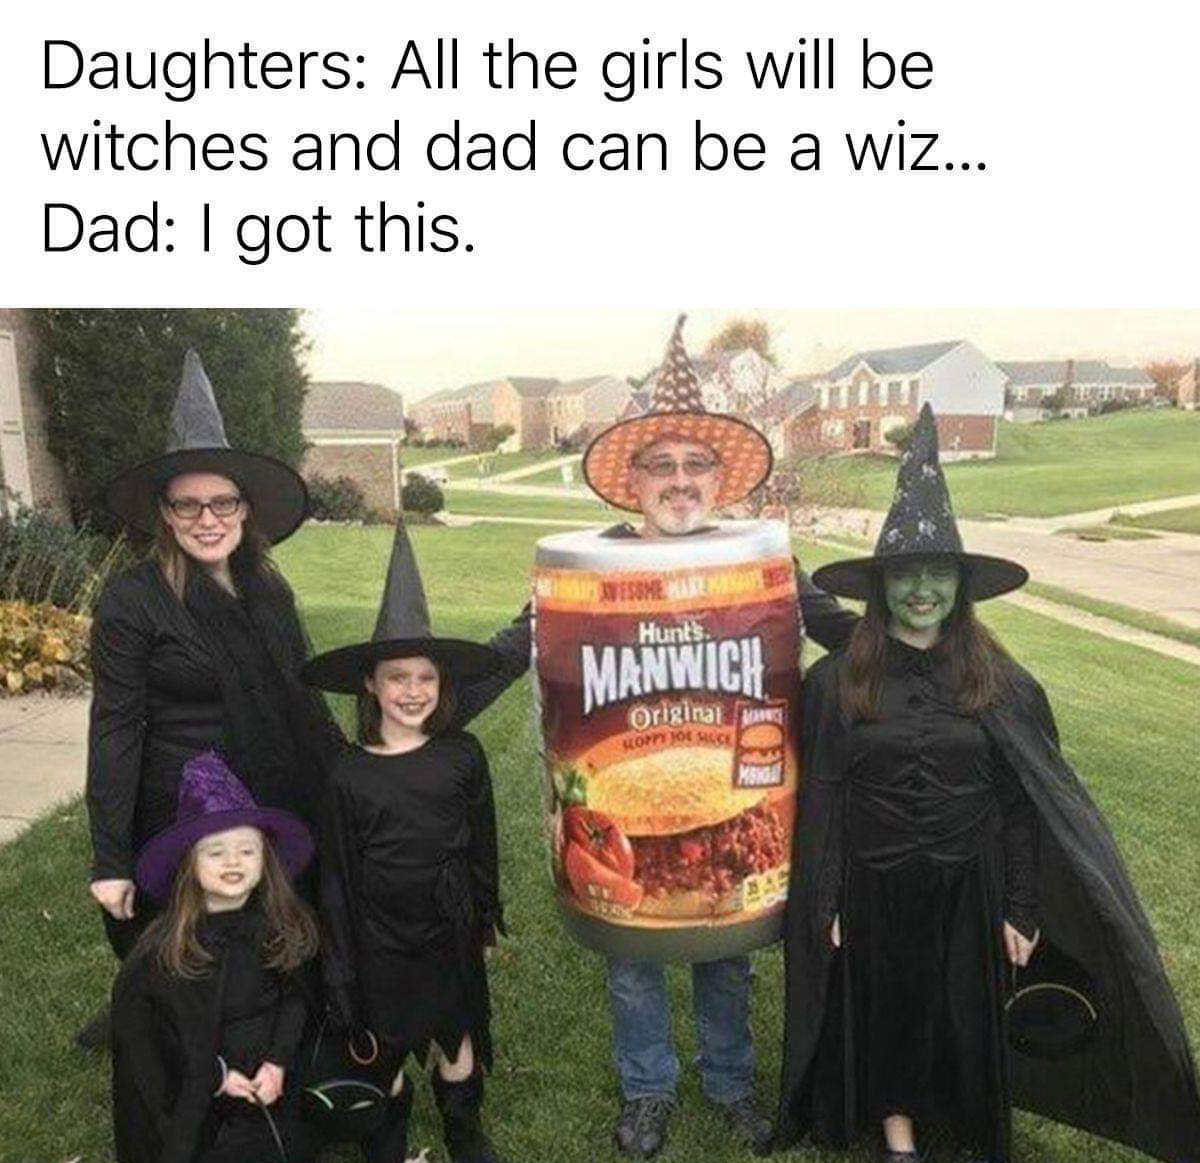 witches and manwich costume - Daughters All the girls will be witches and dad can be a wiz... Dad I got this. Hunts. Manwich Original